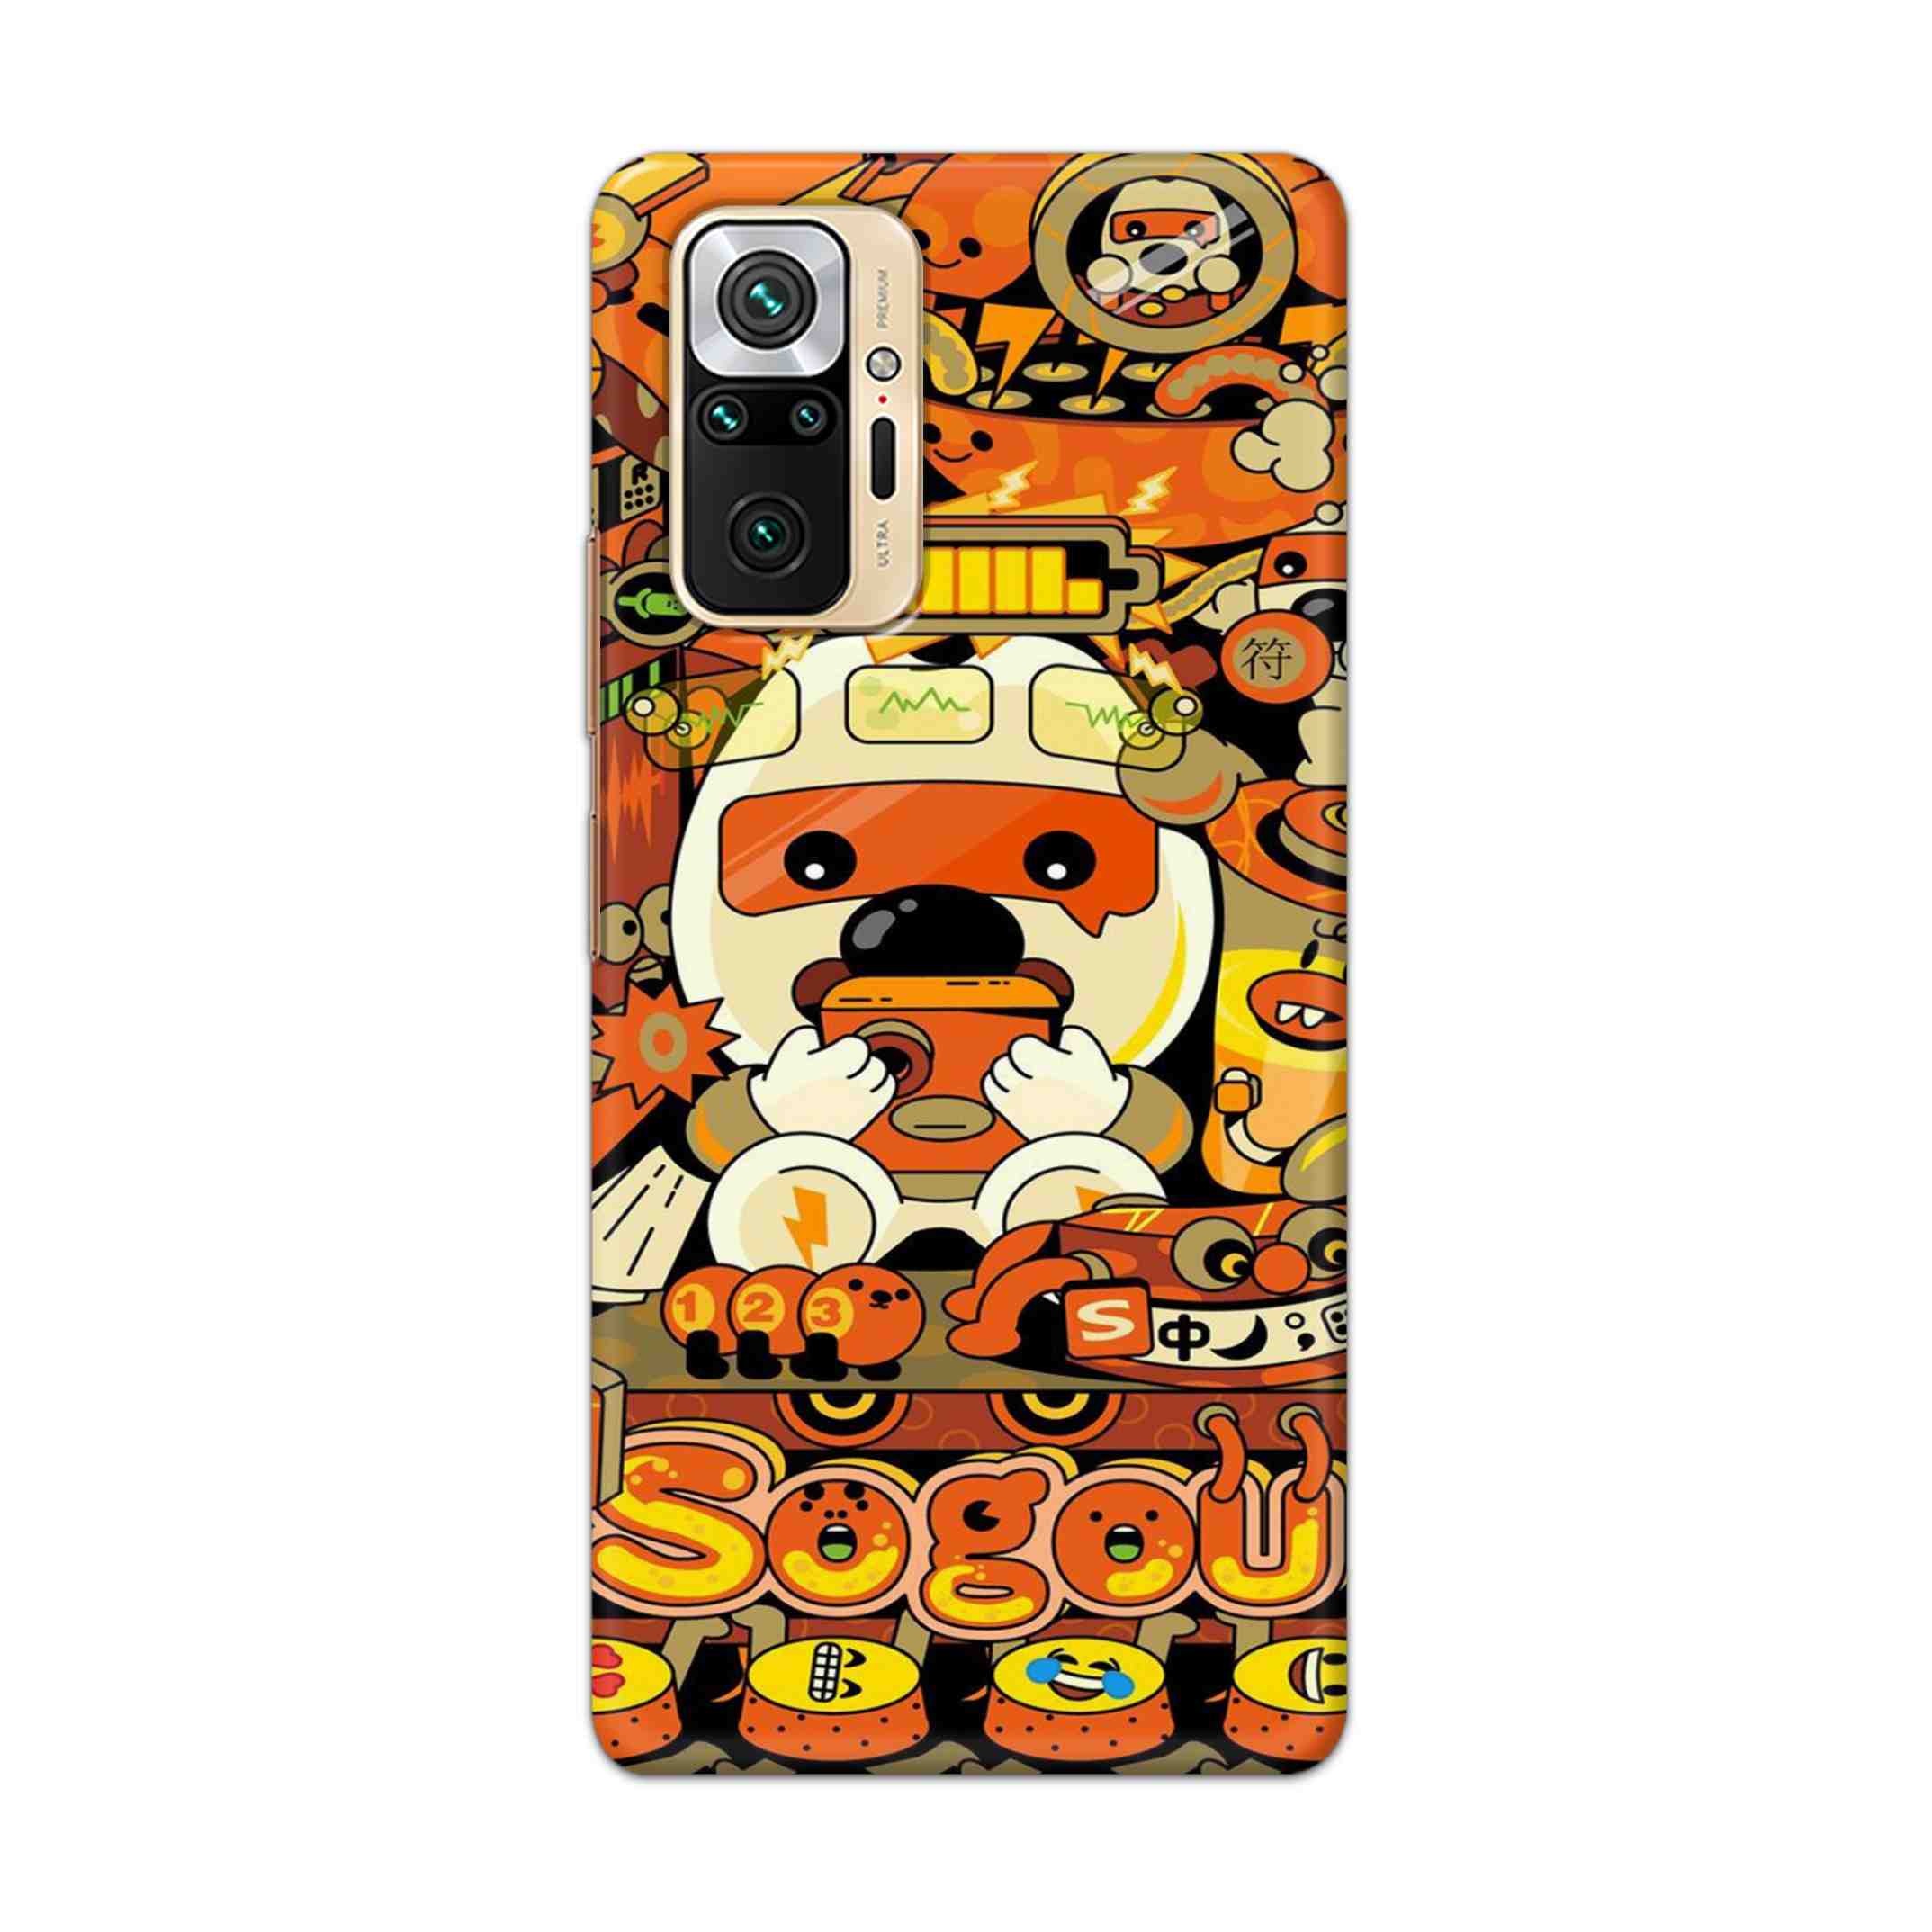 Buy Sogou Hard Back Mobile Phone Case Cover For Redmi Note 10 Pro Online